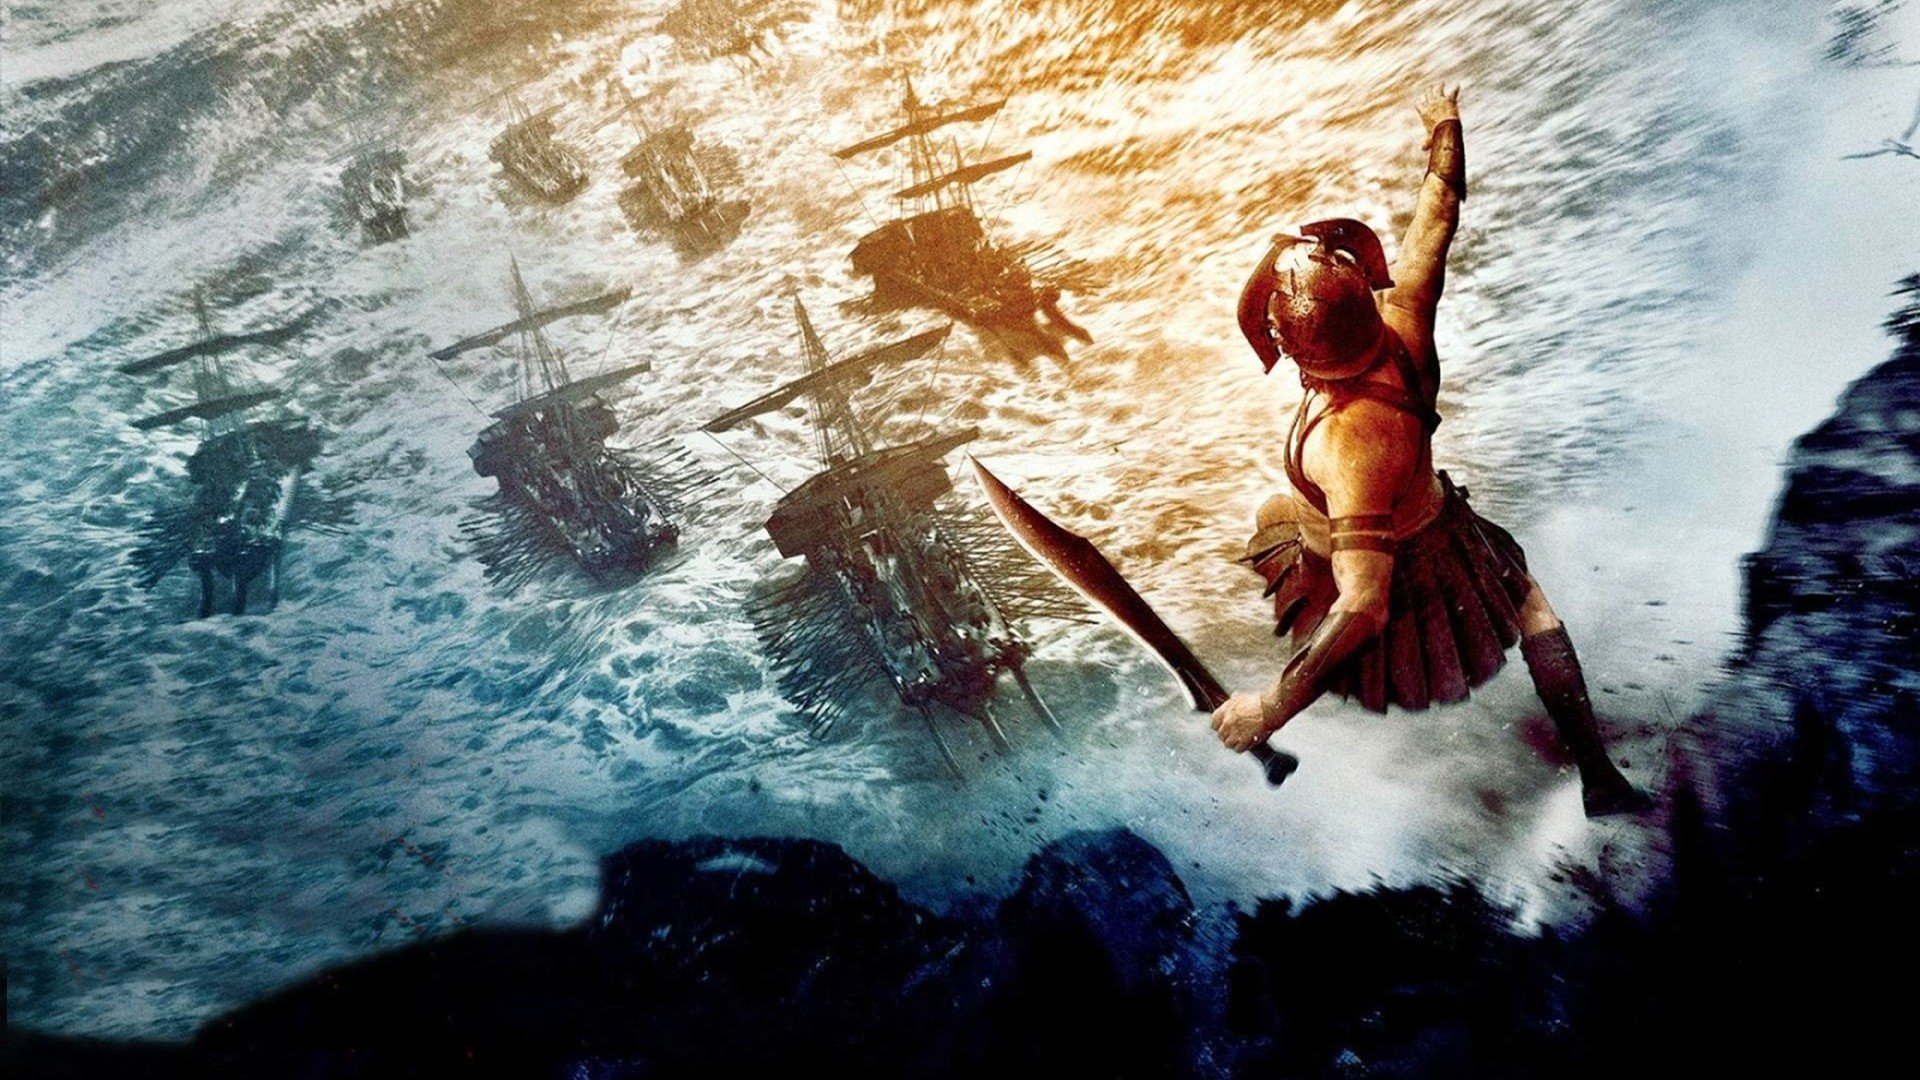 300, Rise, Of, An, Empire, Action, Drama, Fighting, Warrior, Fantasy, Spartan Wallpaper